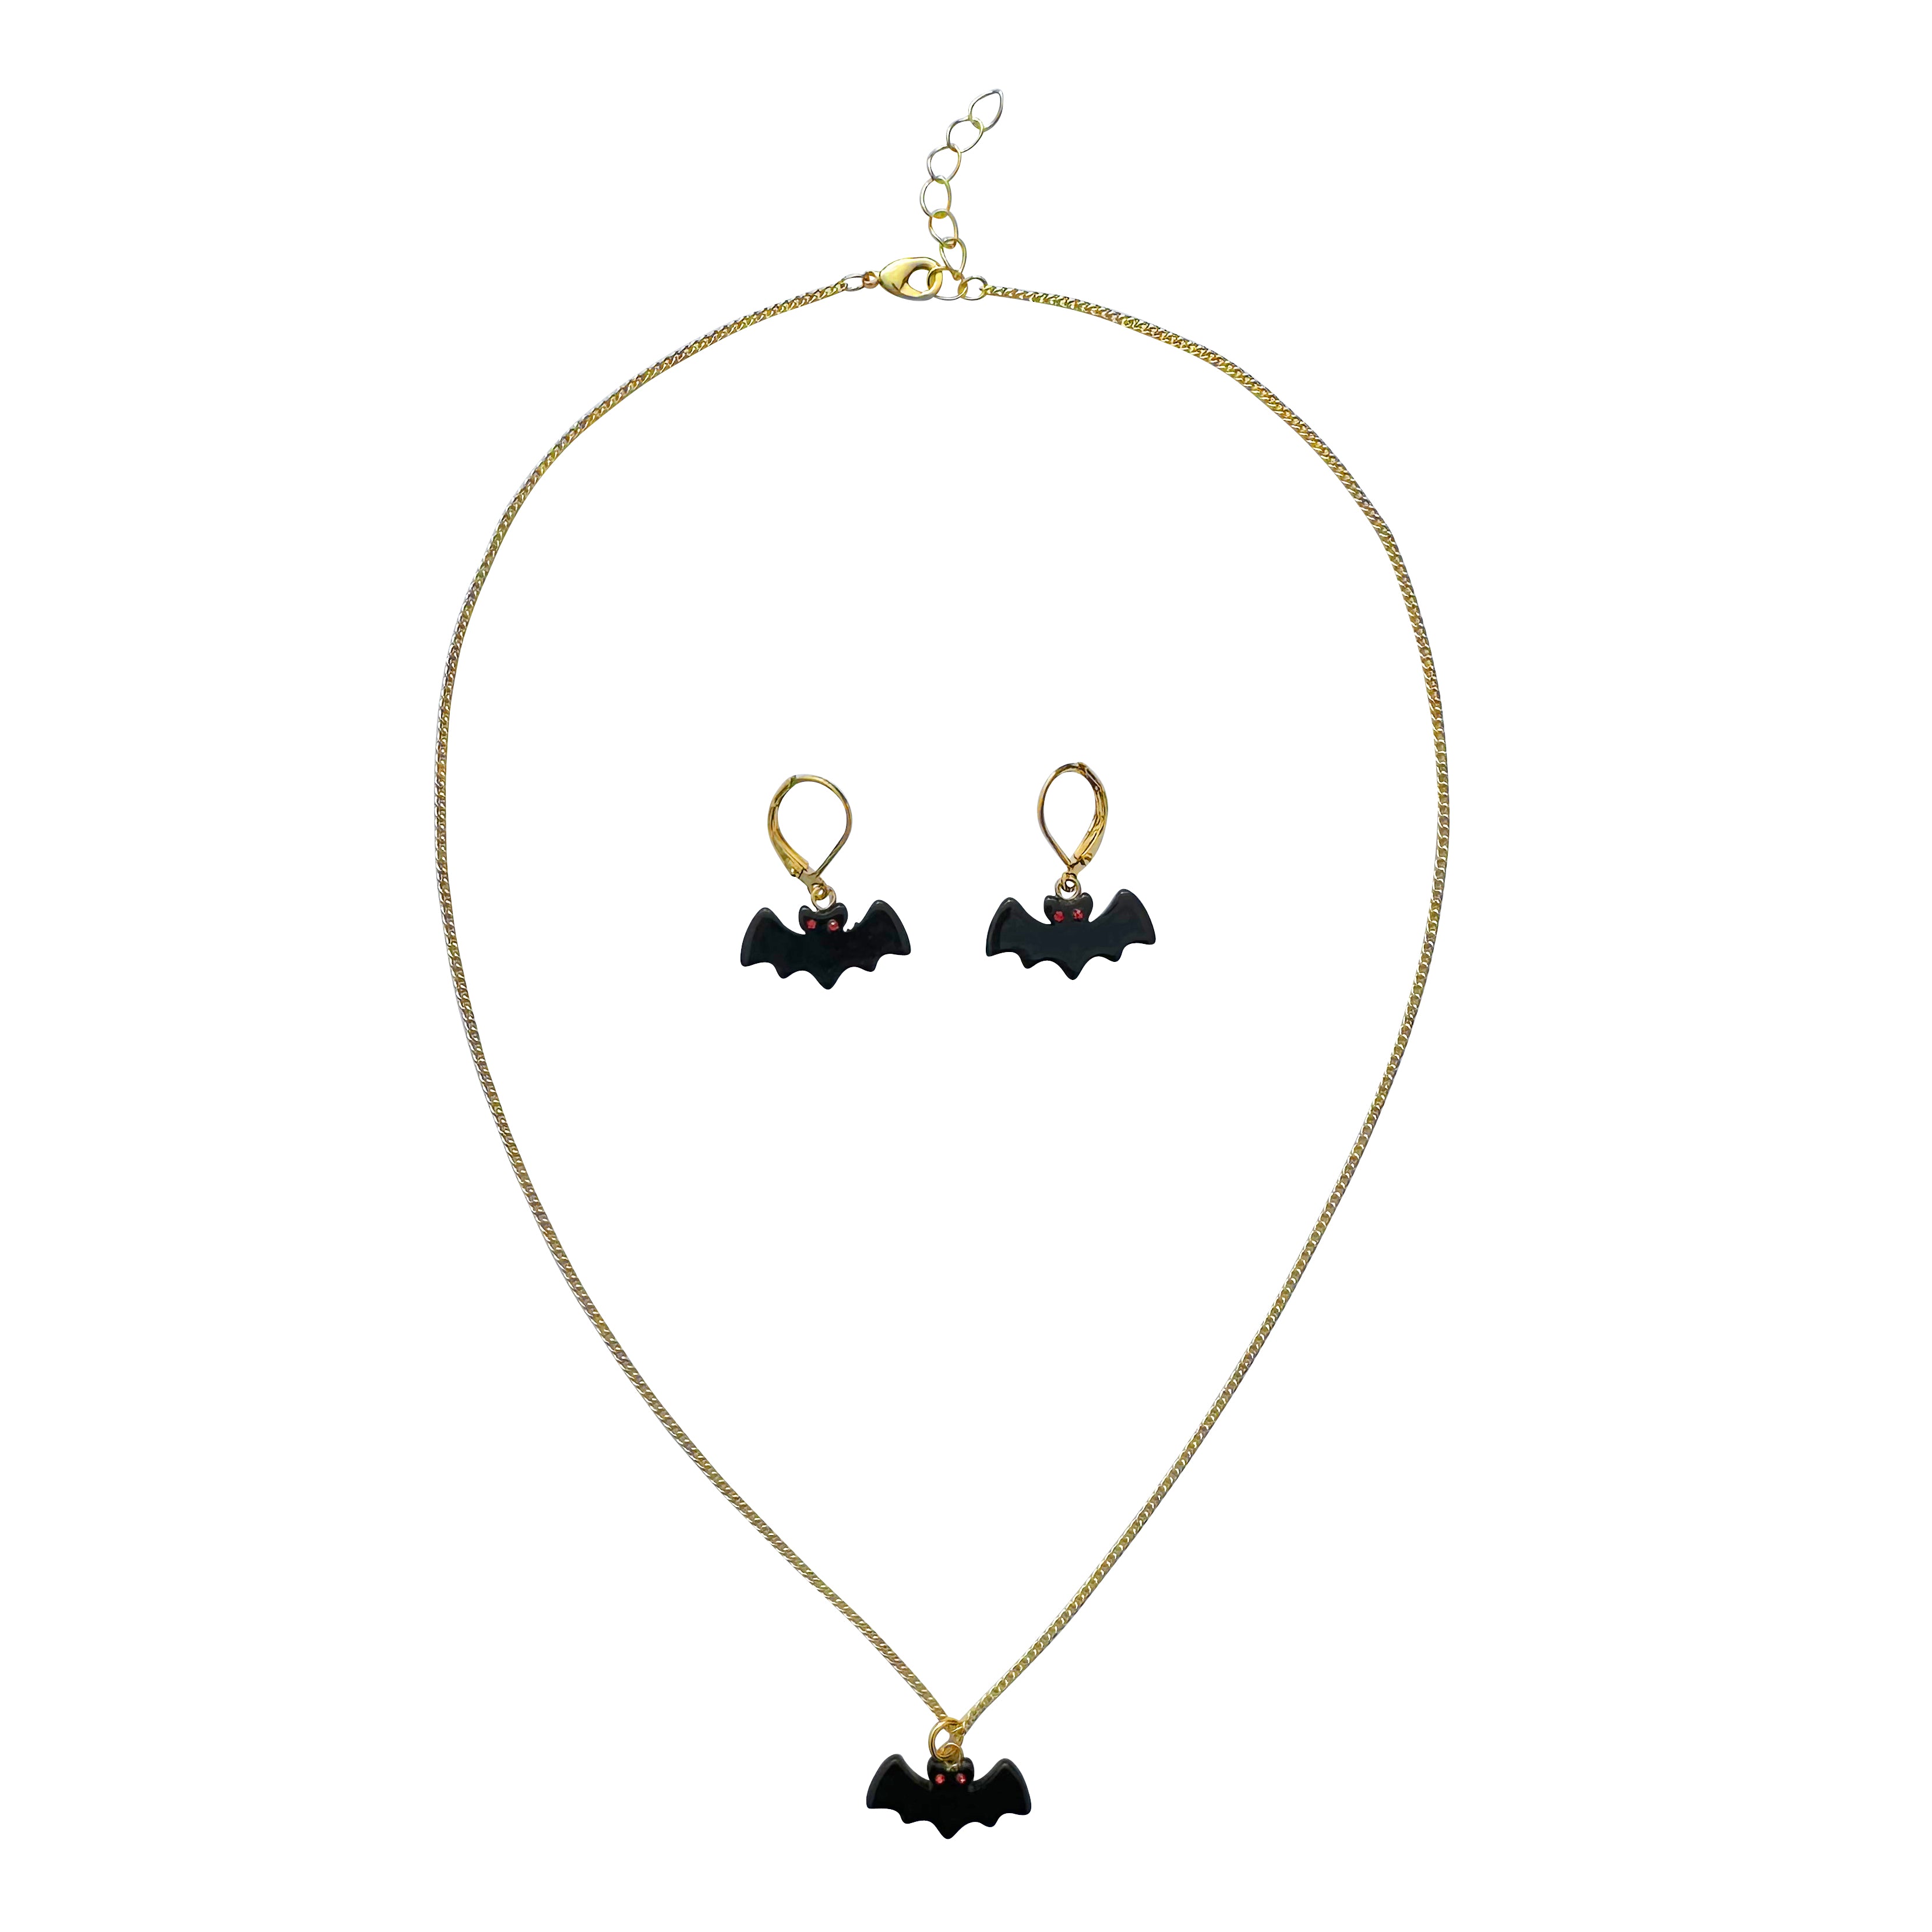 Black statement necklace, Black gemstone necklace earrings set at ₹3550 |  Azilaa